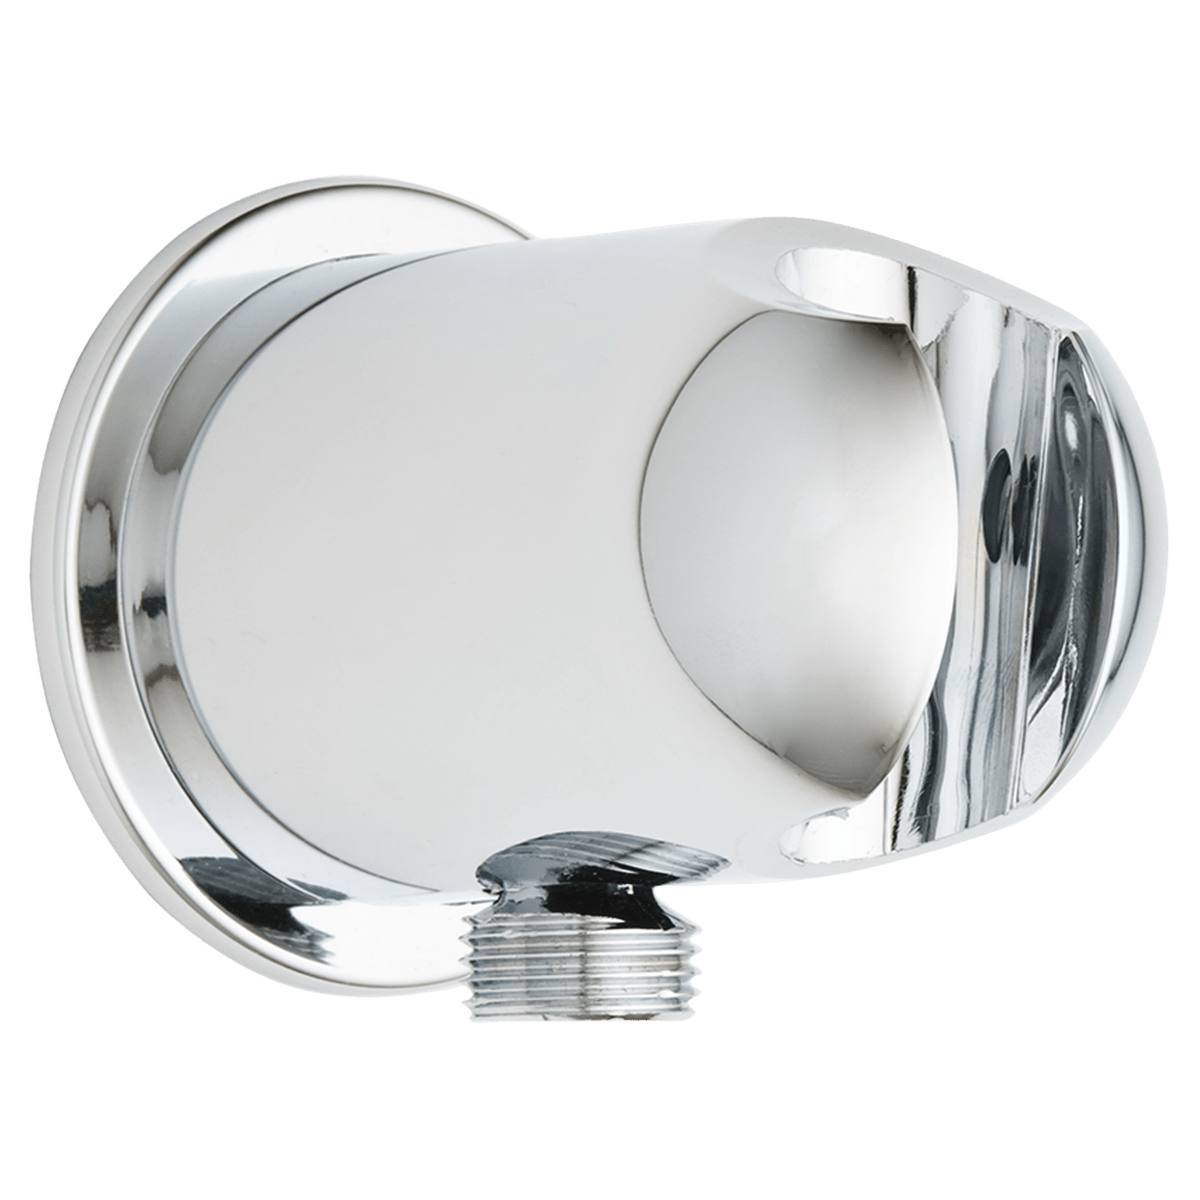 AMERICAN STANDARD 8888.038 WALL SUPPLY BRACKET WITH INTEGRAL BRACKET FOR USE WITH PERSONAL SHOWERS